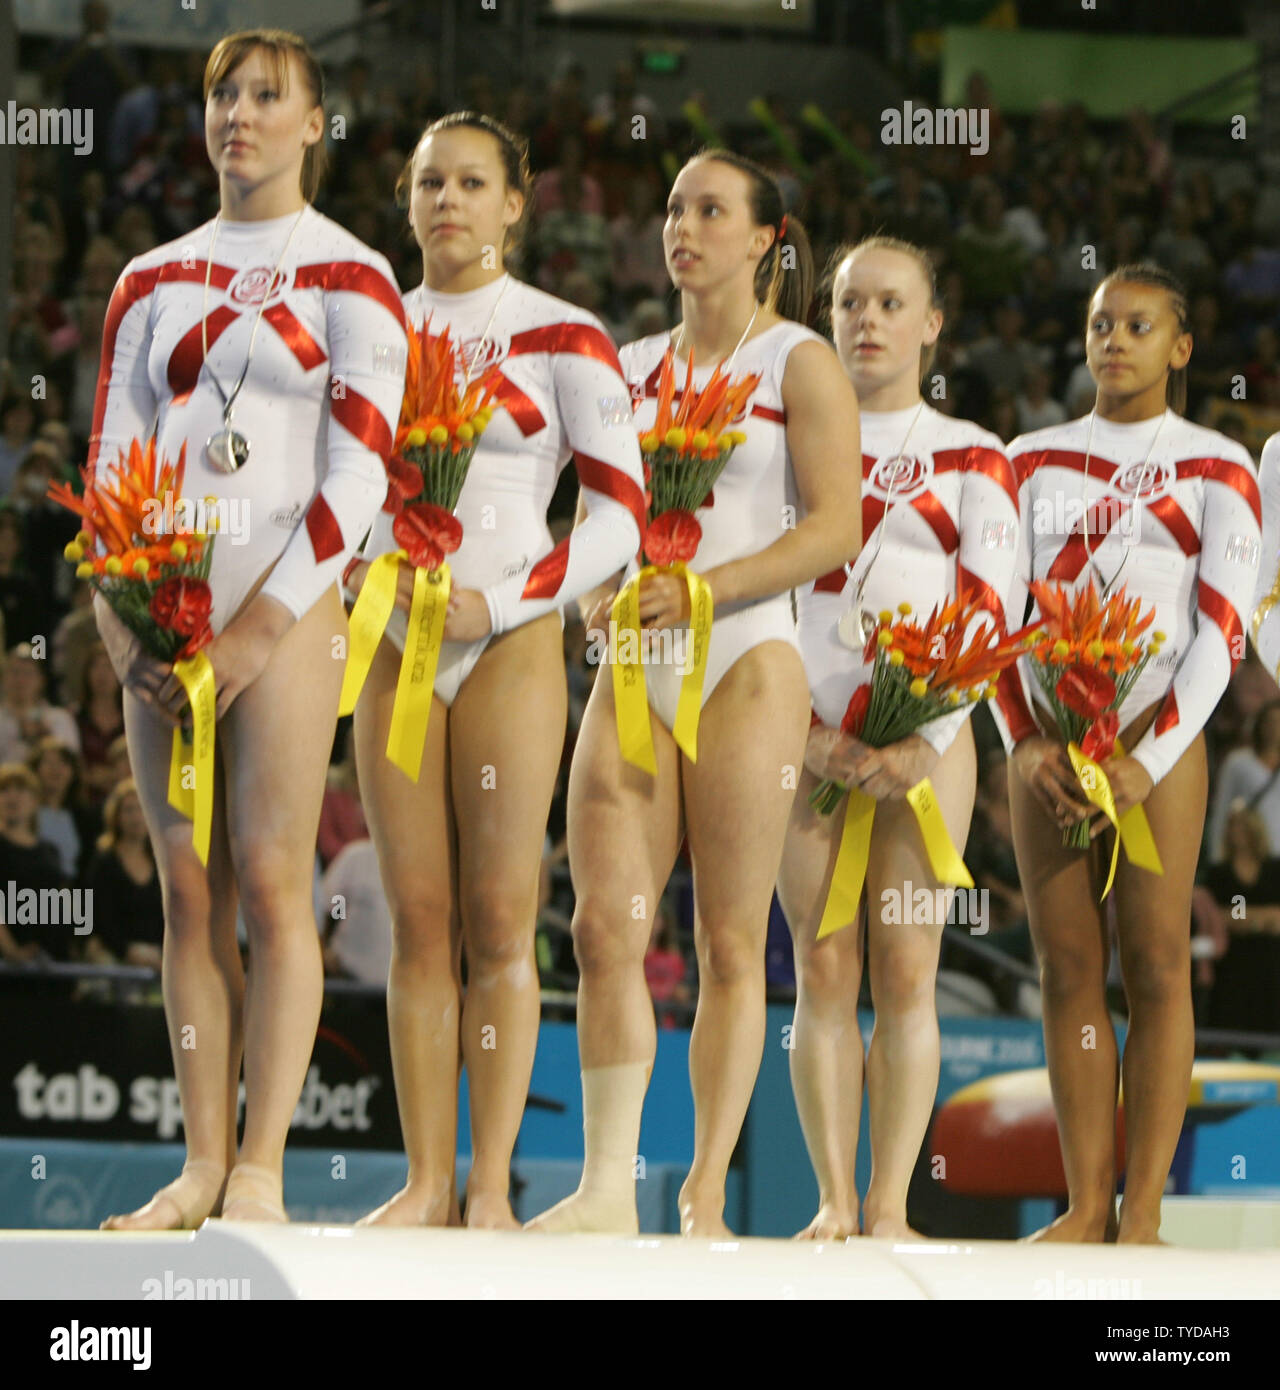 The women's artistic gymnastics team from England claim the silver medal in the women's team finals and qualifying competition at the XVIII Commonwealth Games in Melbourne on March 17, 2006. The English team of (from left) Imogen Cairns, Shavahn Church, Elizabeth Tweddle (injured), Hannah Clowes, and Becky Downie finished with a total of 164.350 points between Australia and Canada. The artistic gymnasts are being scored for the first time using the new international scoring system.  (UPI Photo/Grace Chiu). Stock Photo